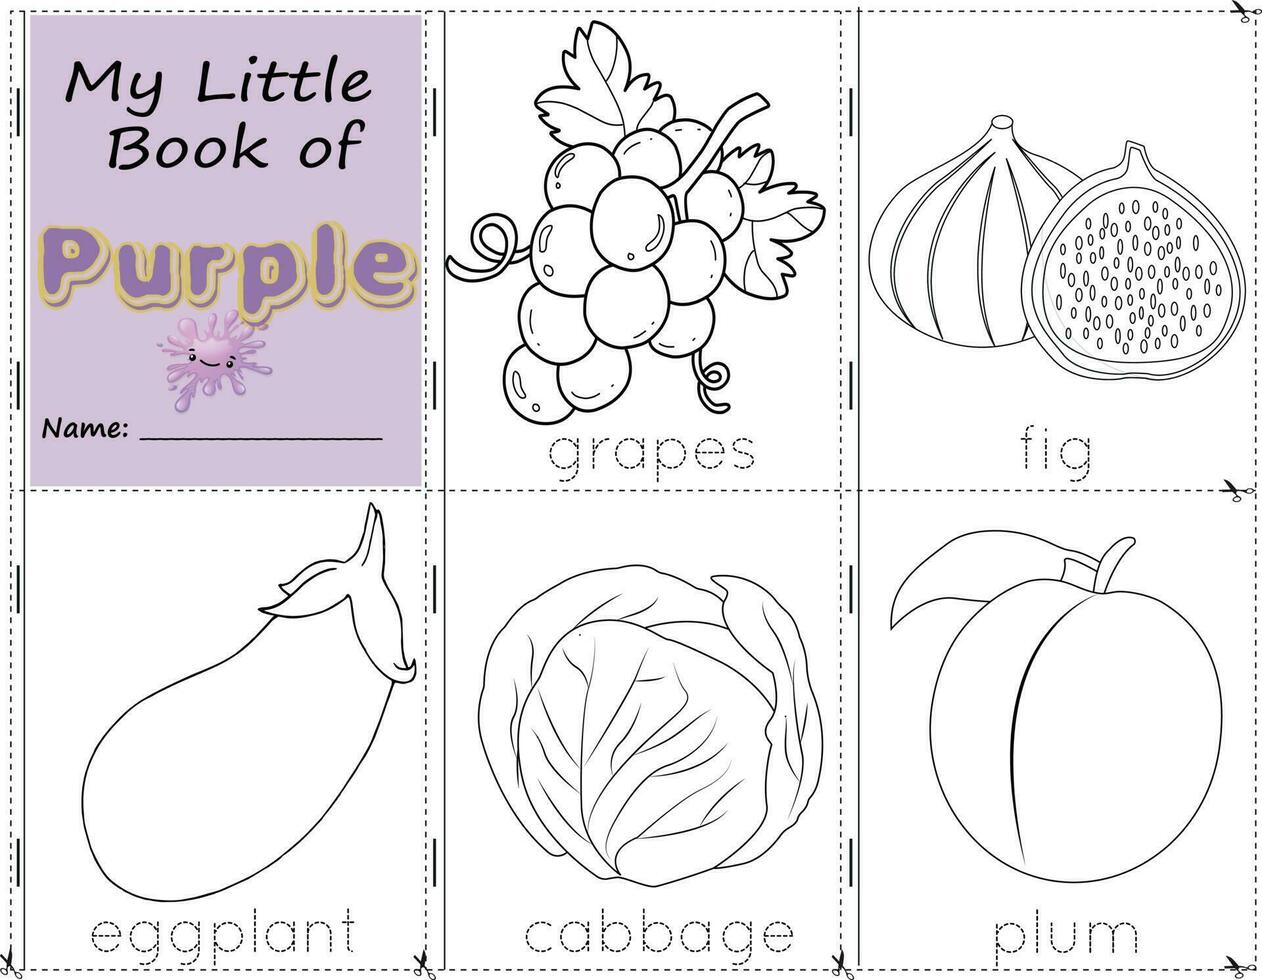 My Little Book of Purple Color objects purple to paint them as they are in real life. Education worksheet for children.  grapes, figs, eggplant, cabbage, and pulm vector